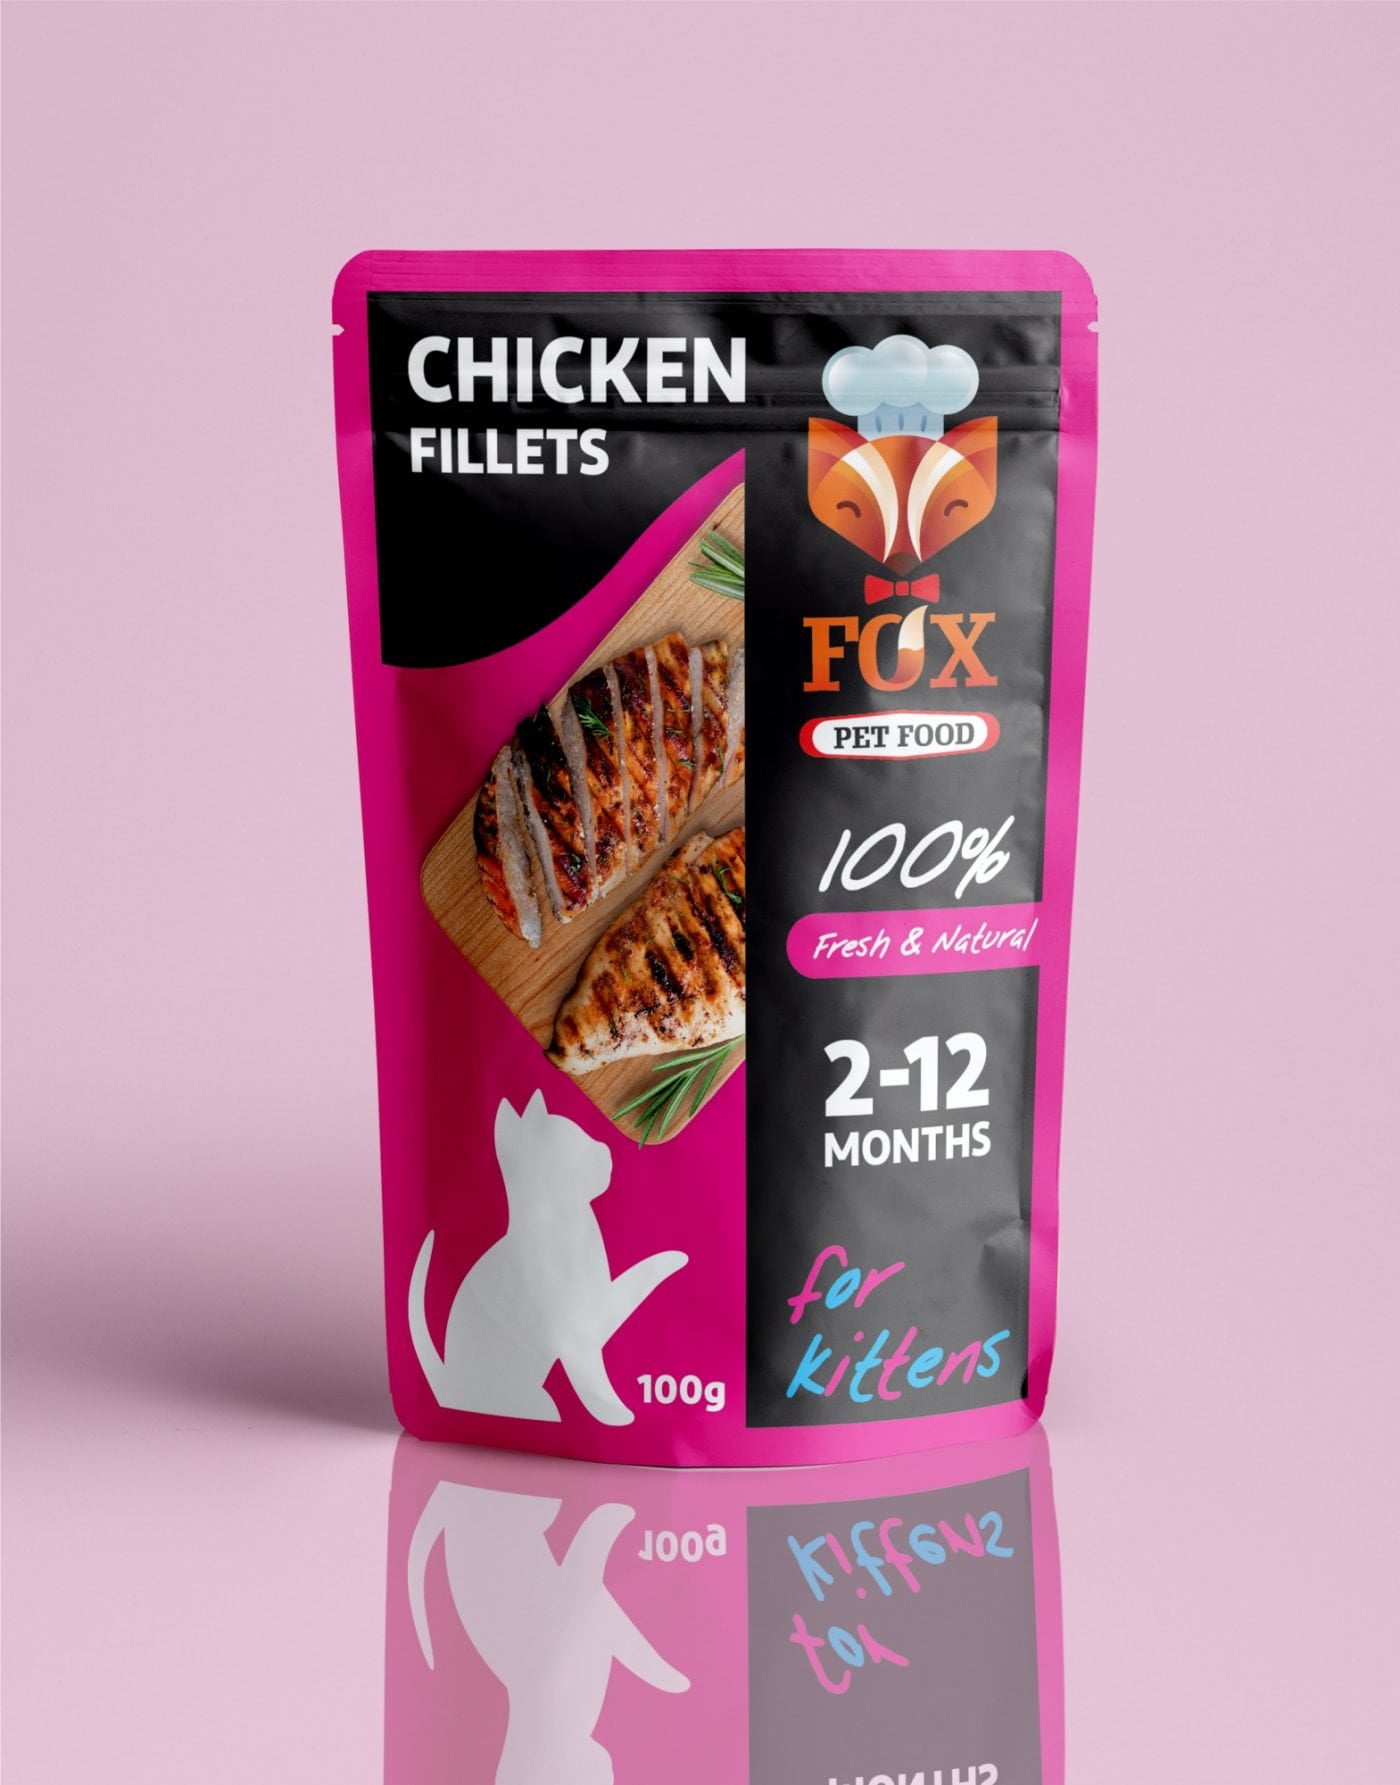 chicken fillets pouch-for kittens-front